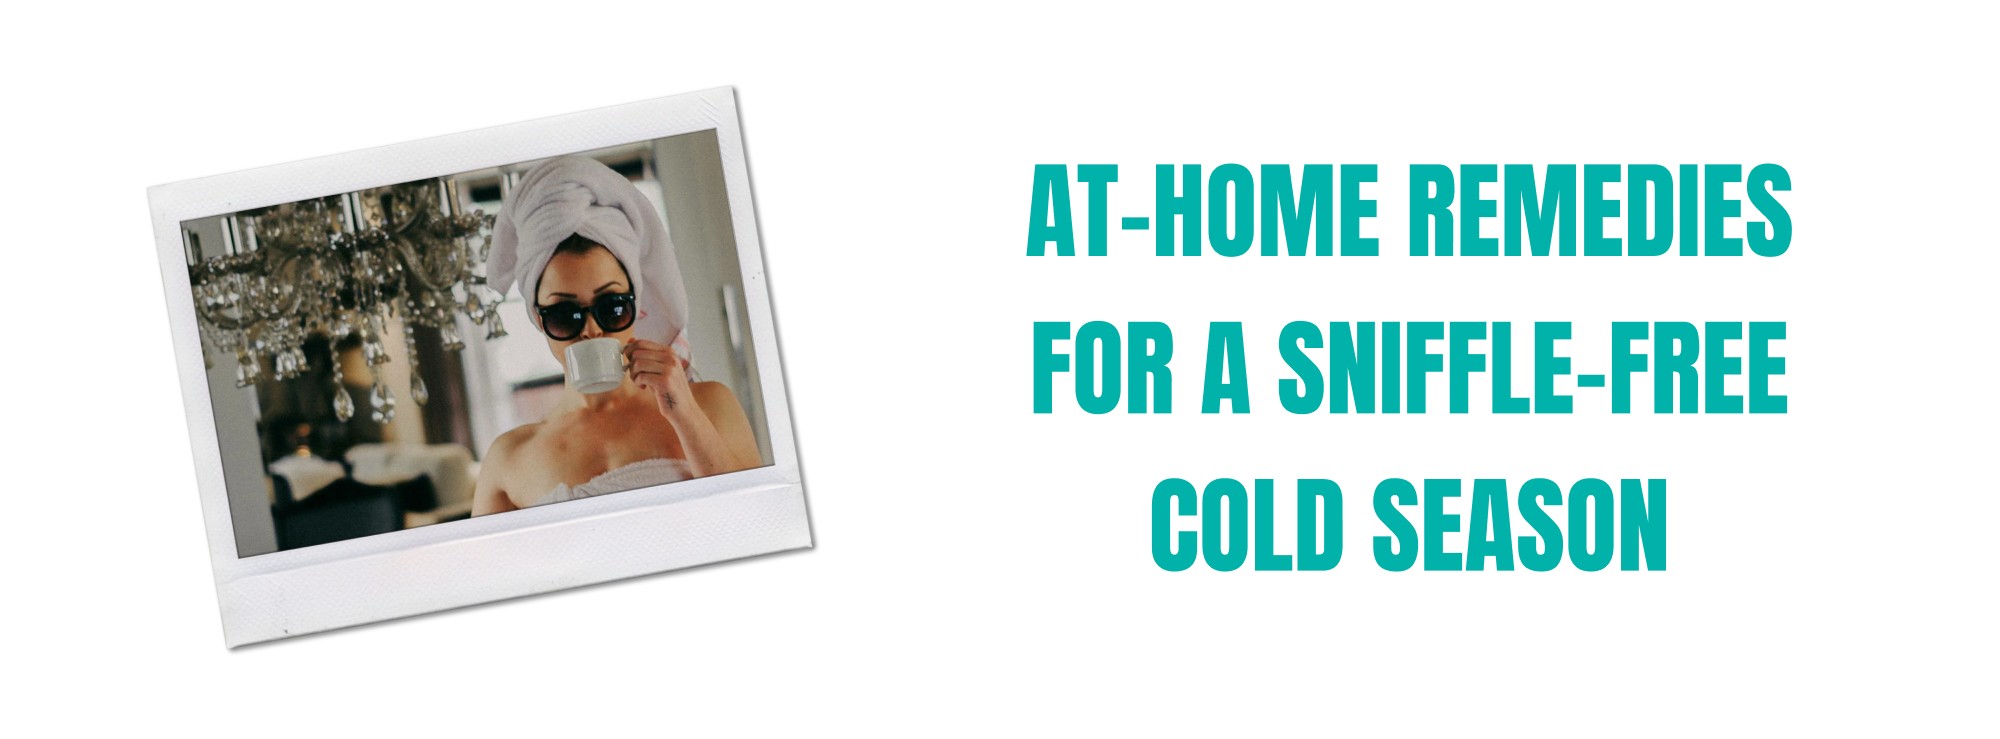 At-Home Remedies for a Sniffle-Free Cold Season